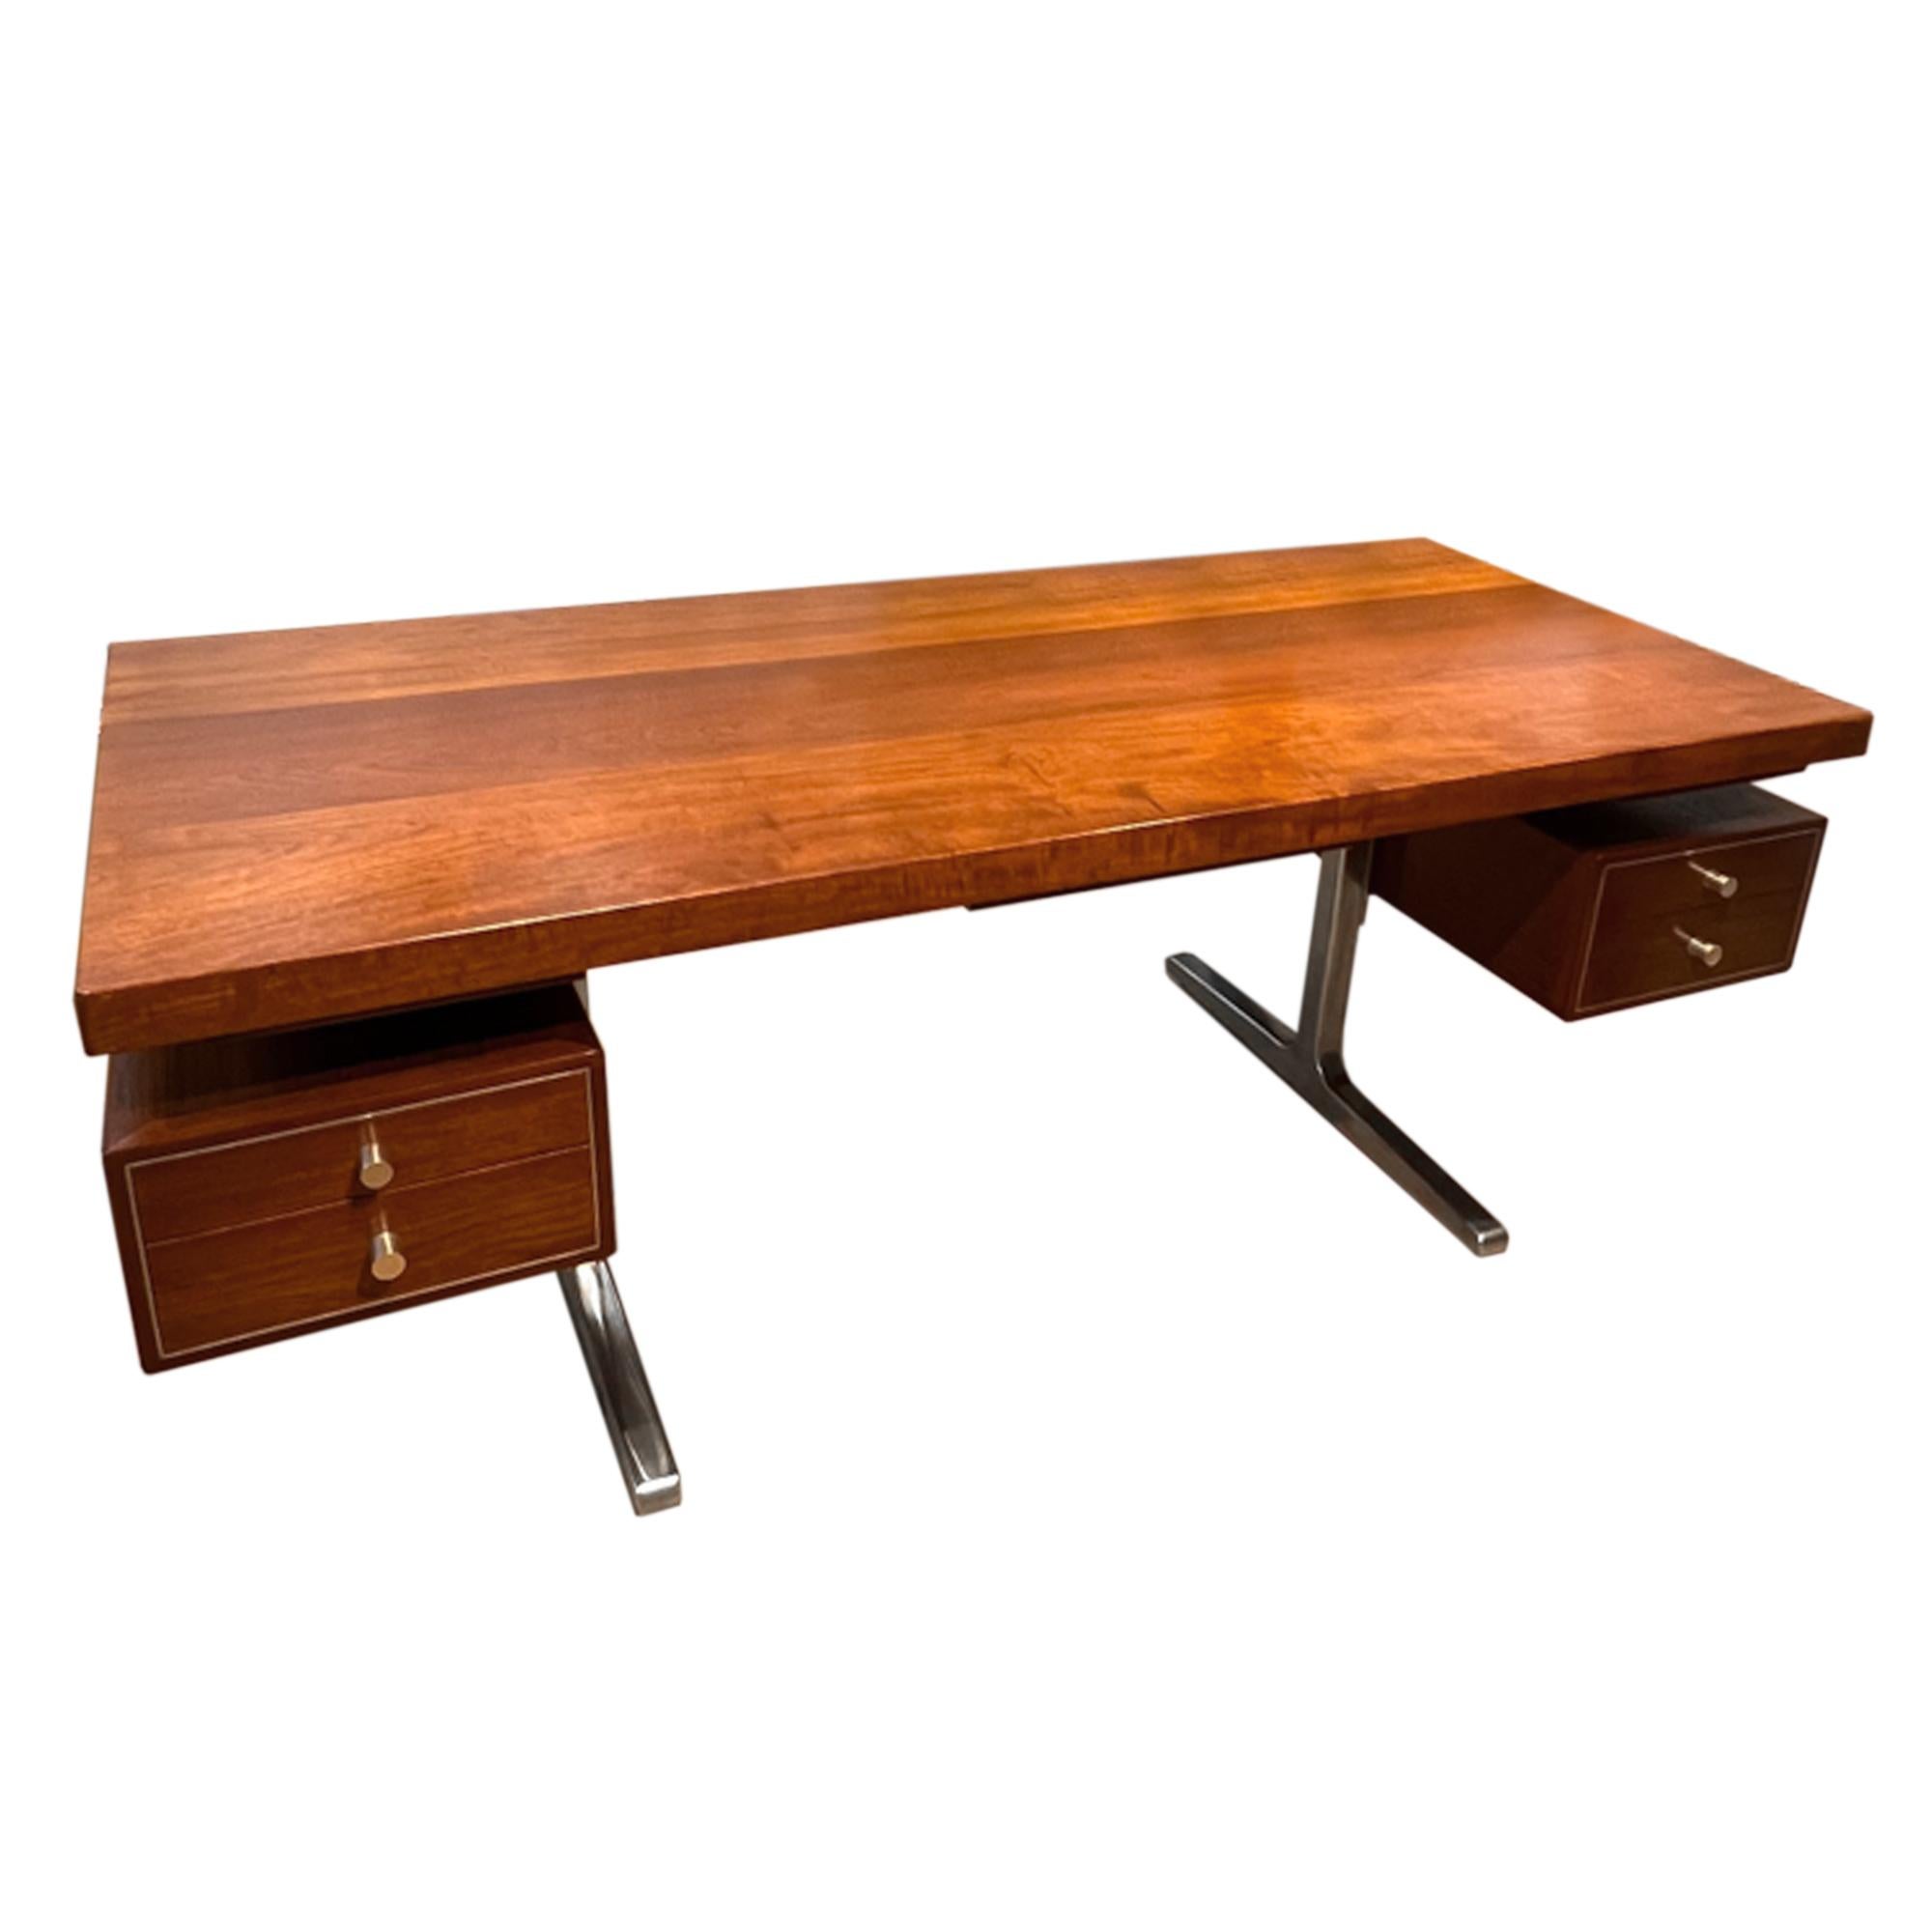 This fantastic desk was made in Italy in the 1960s.

An elegant midcentury design with polished metal detail on the legs, drawers and handles.

A great addition to your home office or a reception desk in a hotel. 

Leg clearance is 67.5cm.